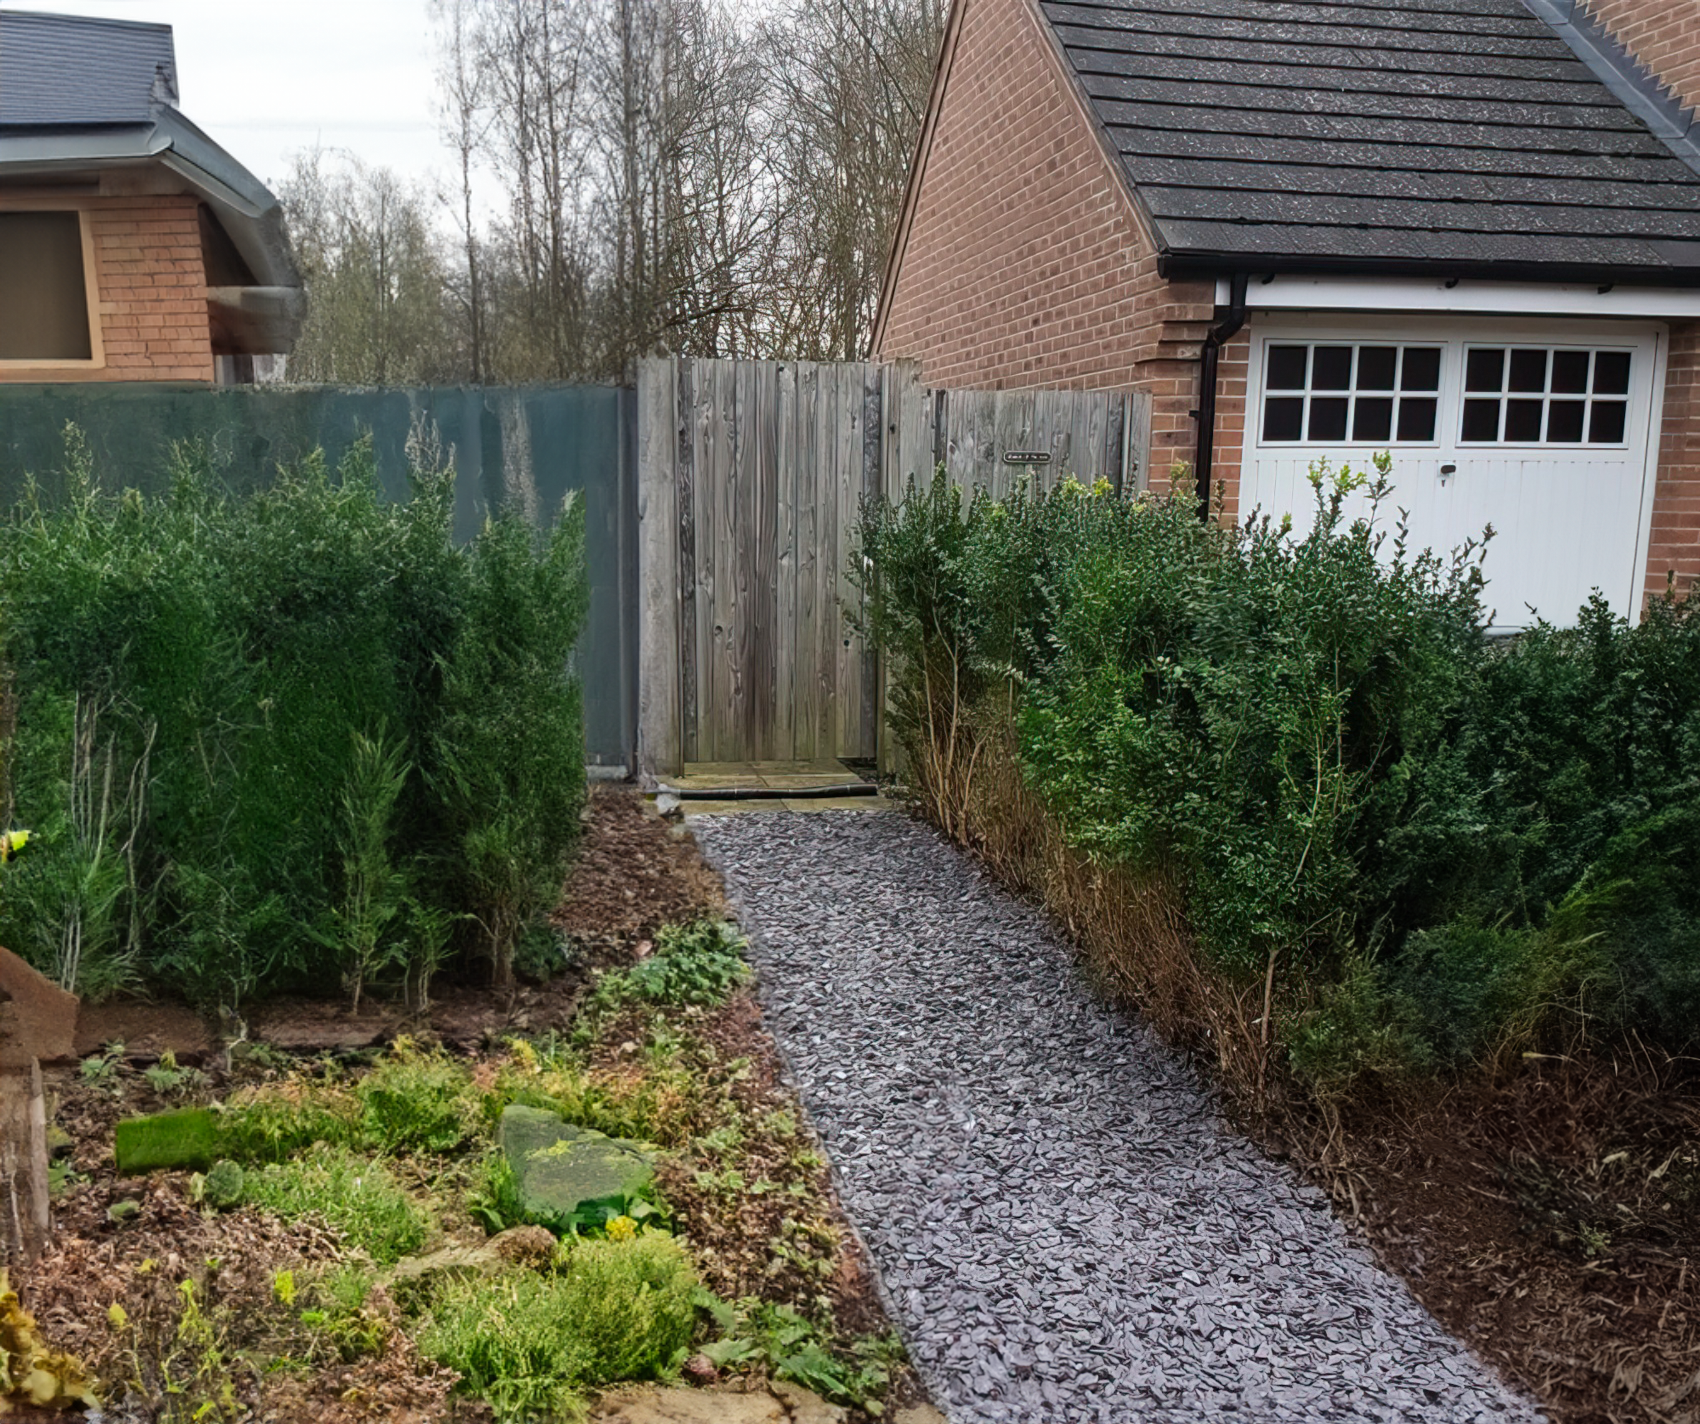 A garden features a gravel pathway bordered by small green bushes and various plants. At the end of the path, edged with 20mm Mixed Blue & Plum Slate Chippings from Brisks, a wooden gate leads to a brick garage with a gray roof and a white door. In the background, trees enhance this landscaping haven.